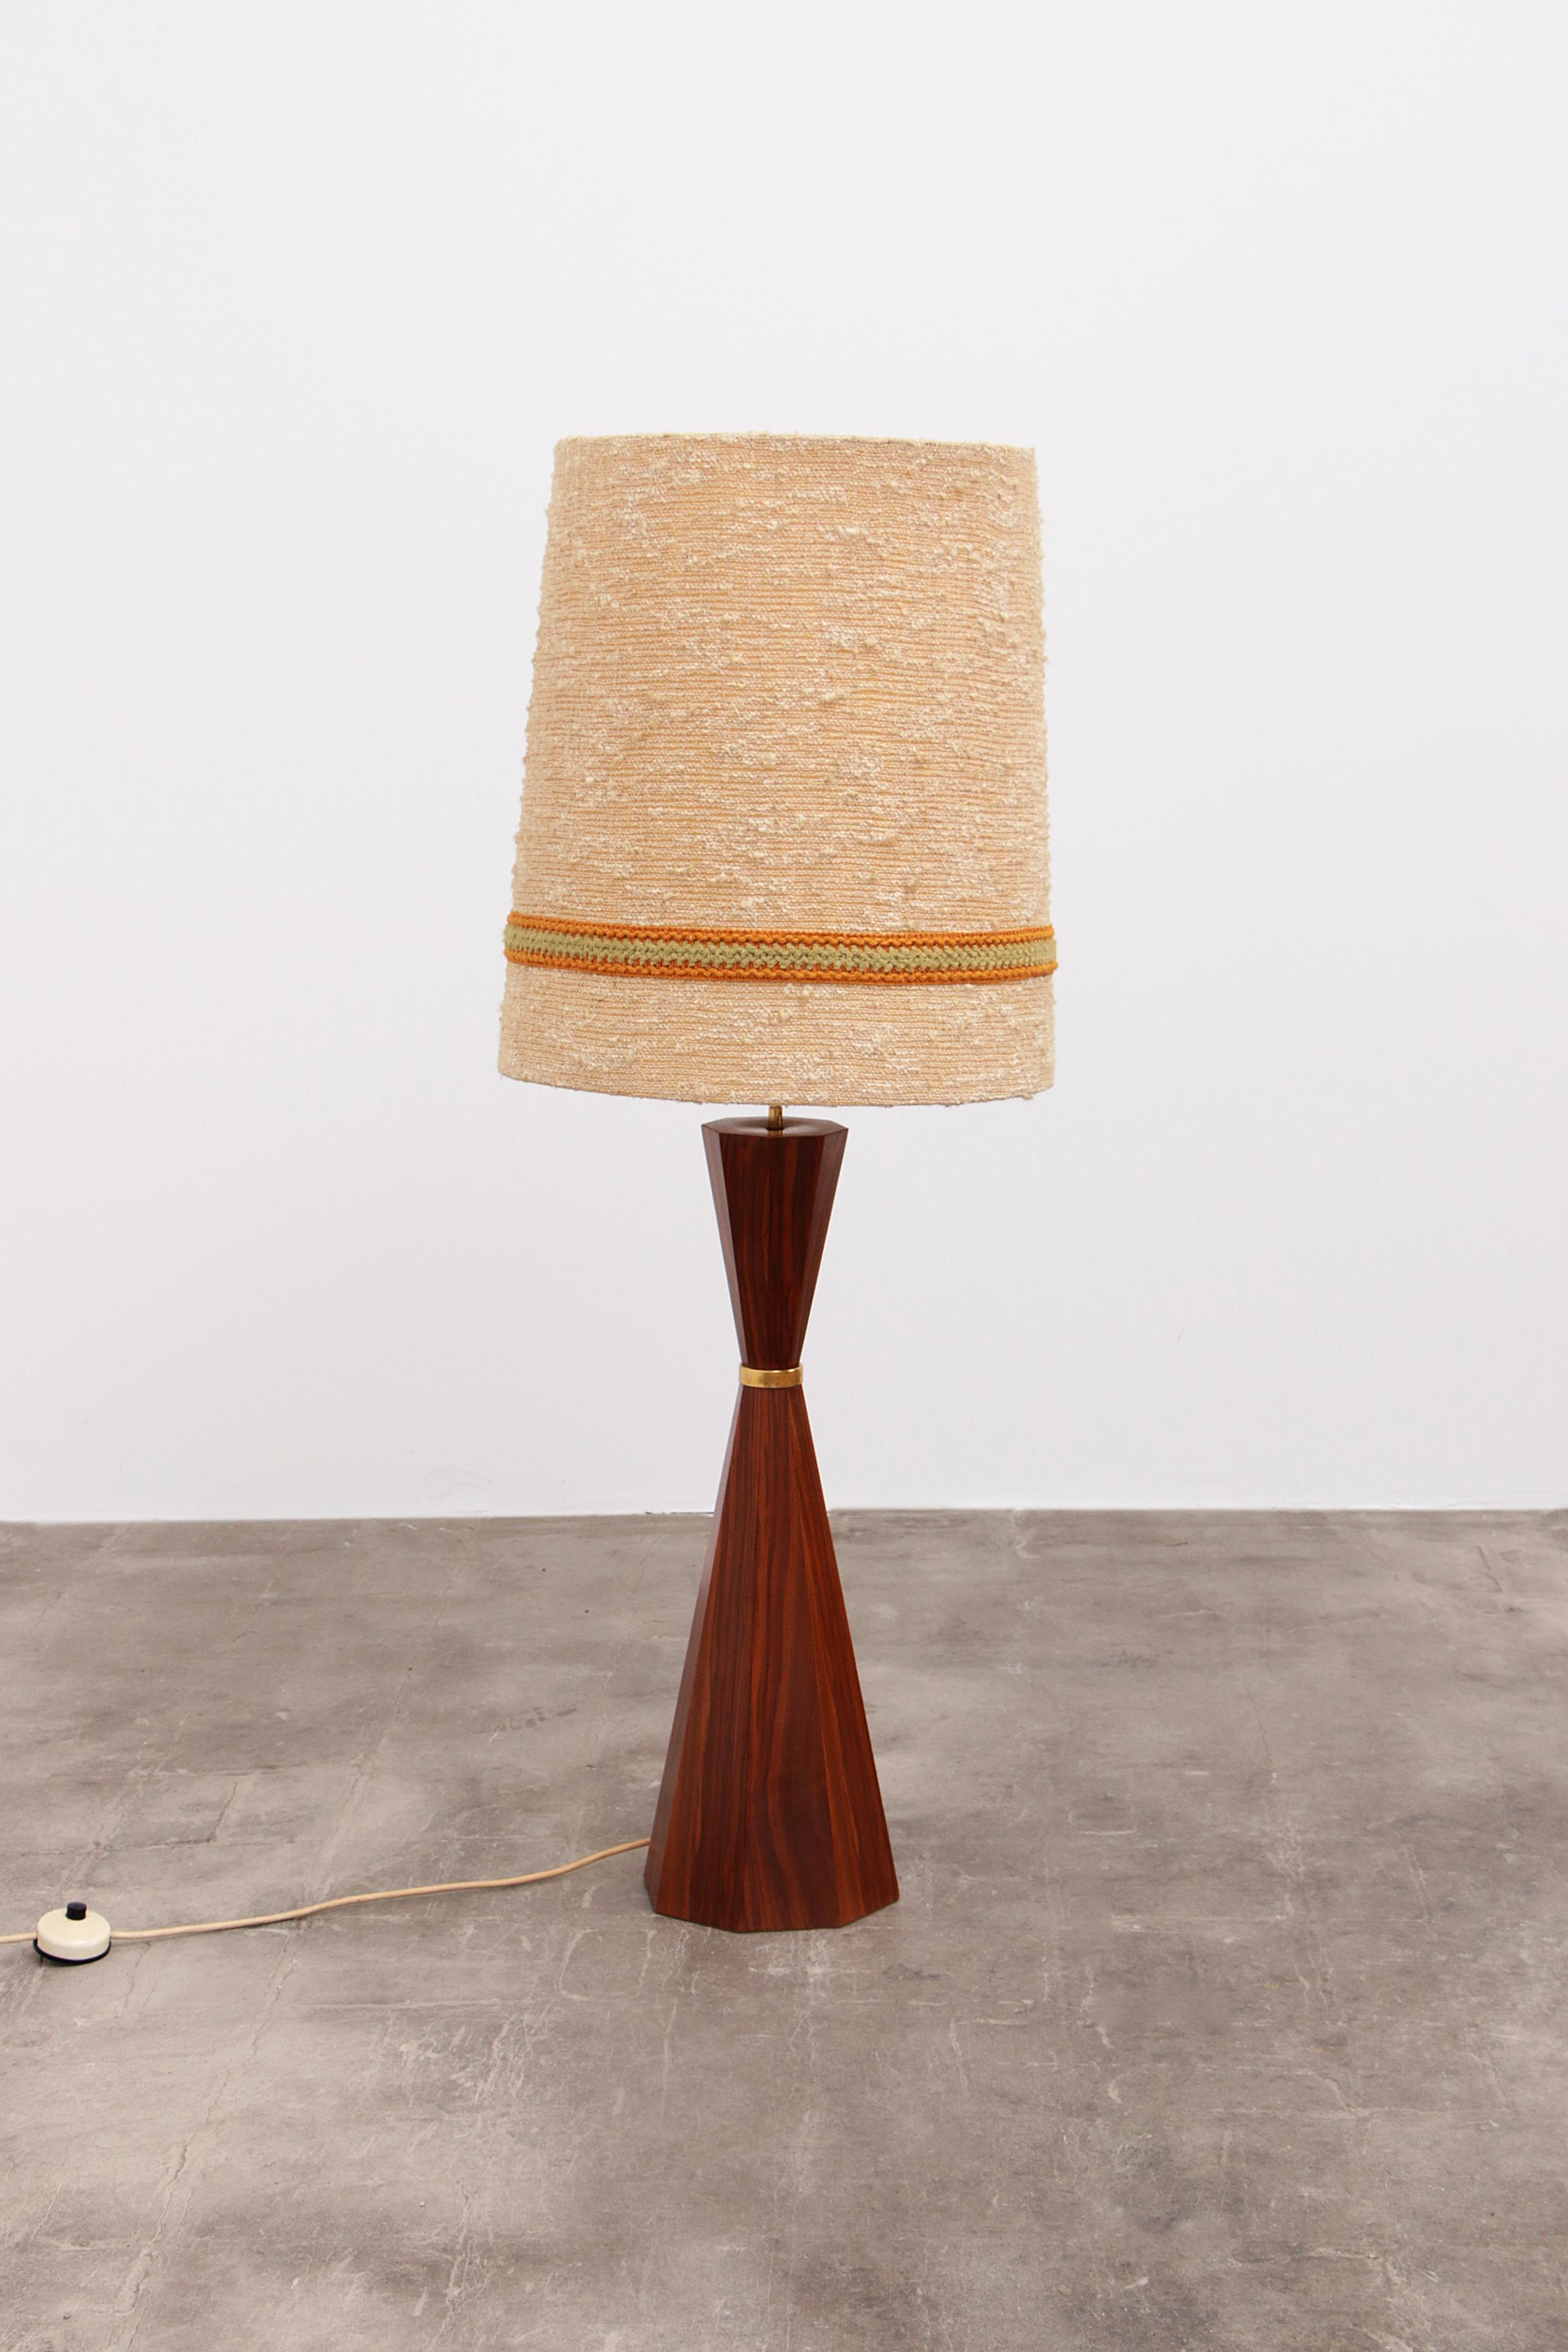 Floor Lamp with Wooden Base and Original Shade, 60sVintage Danish Teak Floor Lamp with Original Shade - 1960s


Discover the charm of authentic Danish design with our Vintage Teak Floor Lamp from the 60s. This elegant floor lamp is a beautiful piece